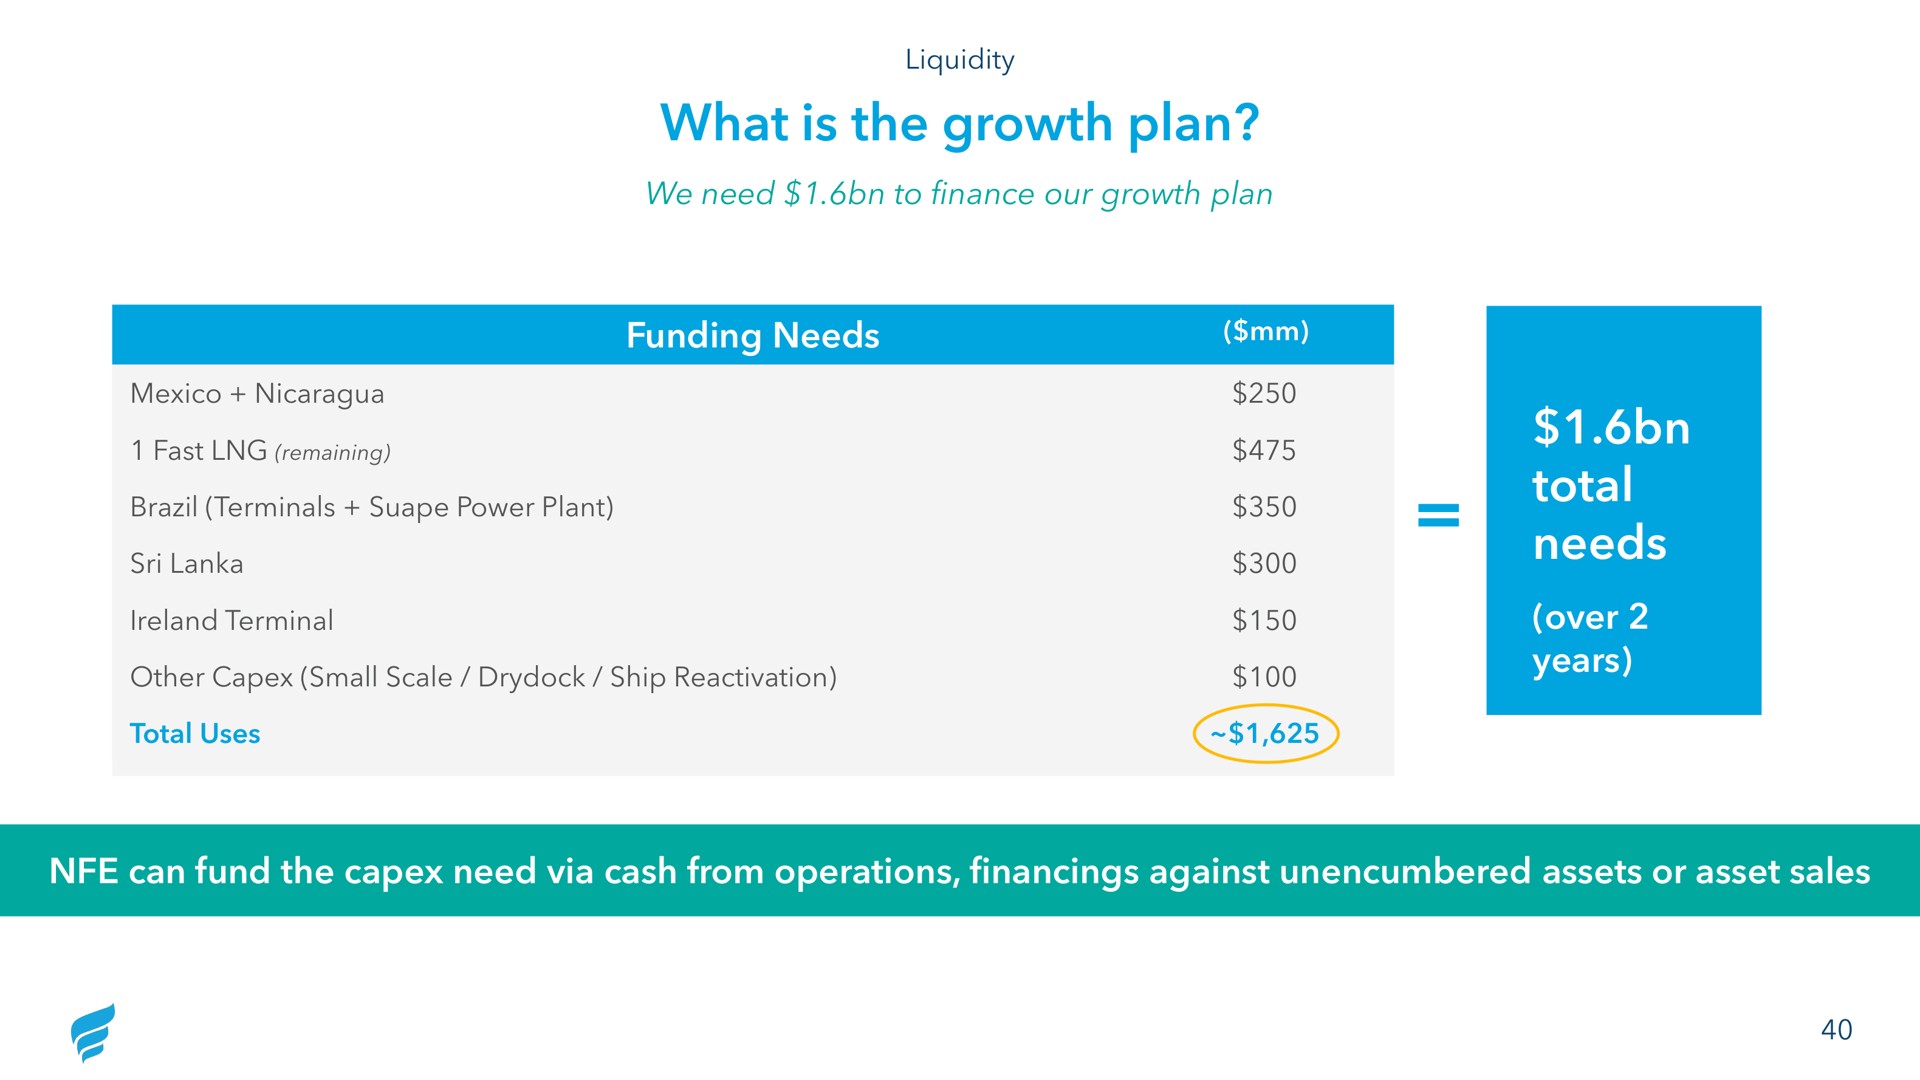 what is the growth plan total needs funding | NewFortress Energy